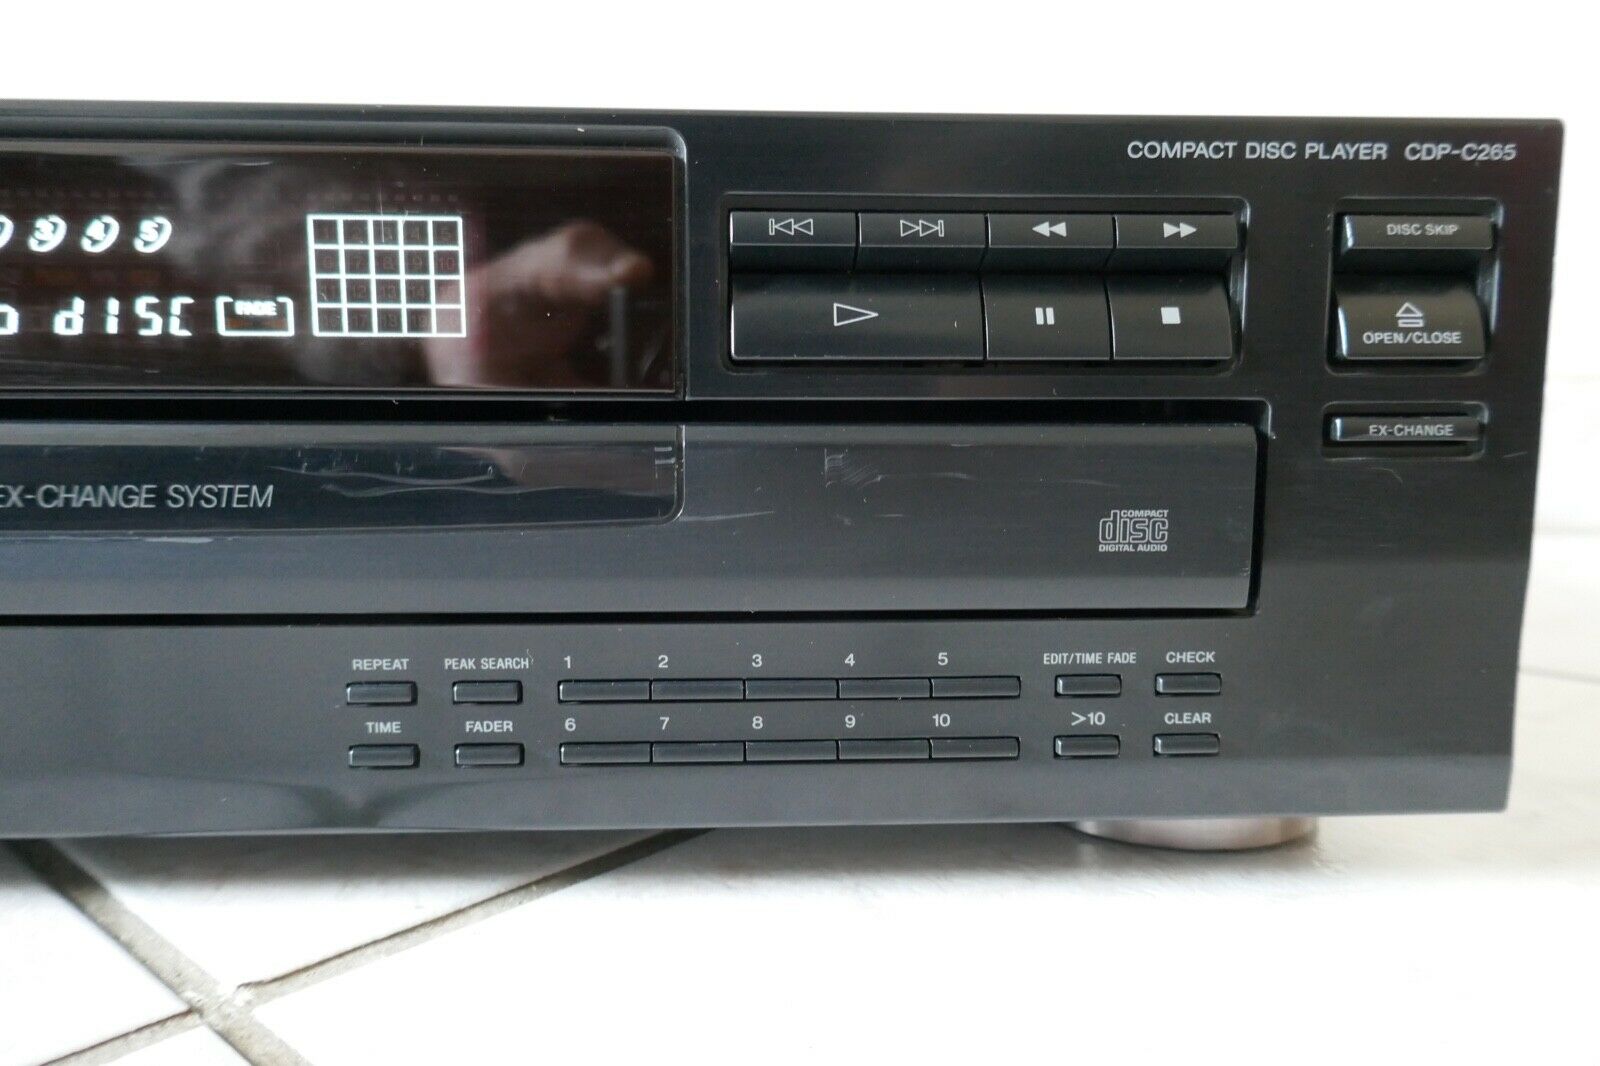 lecteur cd compact disc player sony CDP-C265 vintage occasion